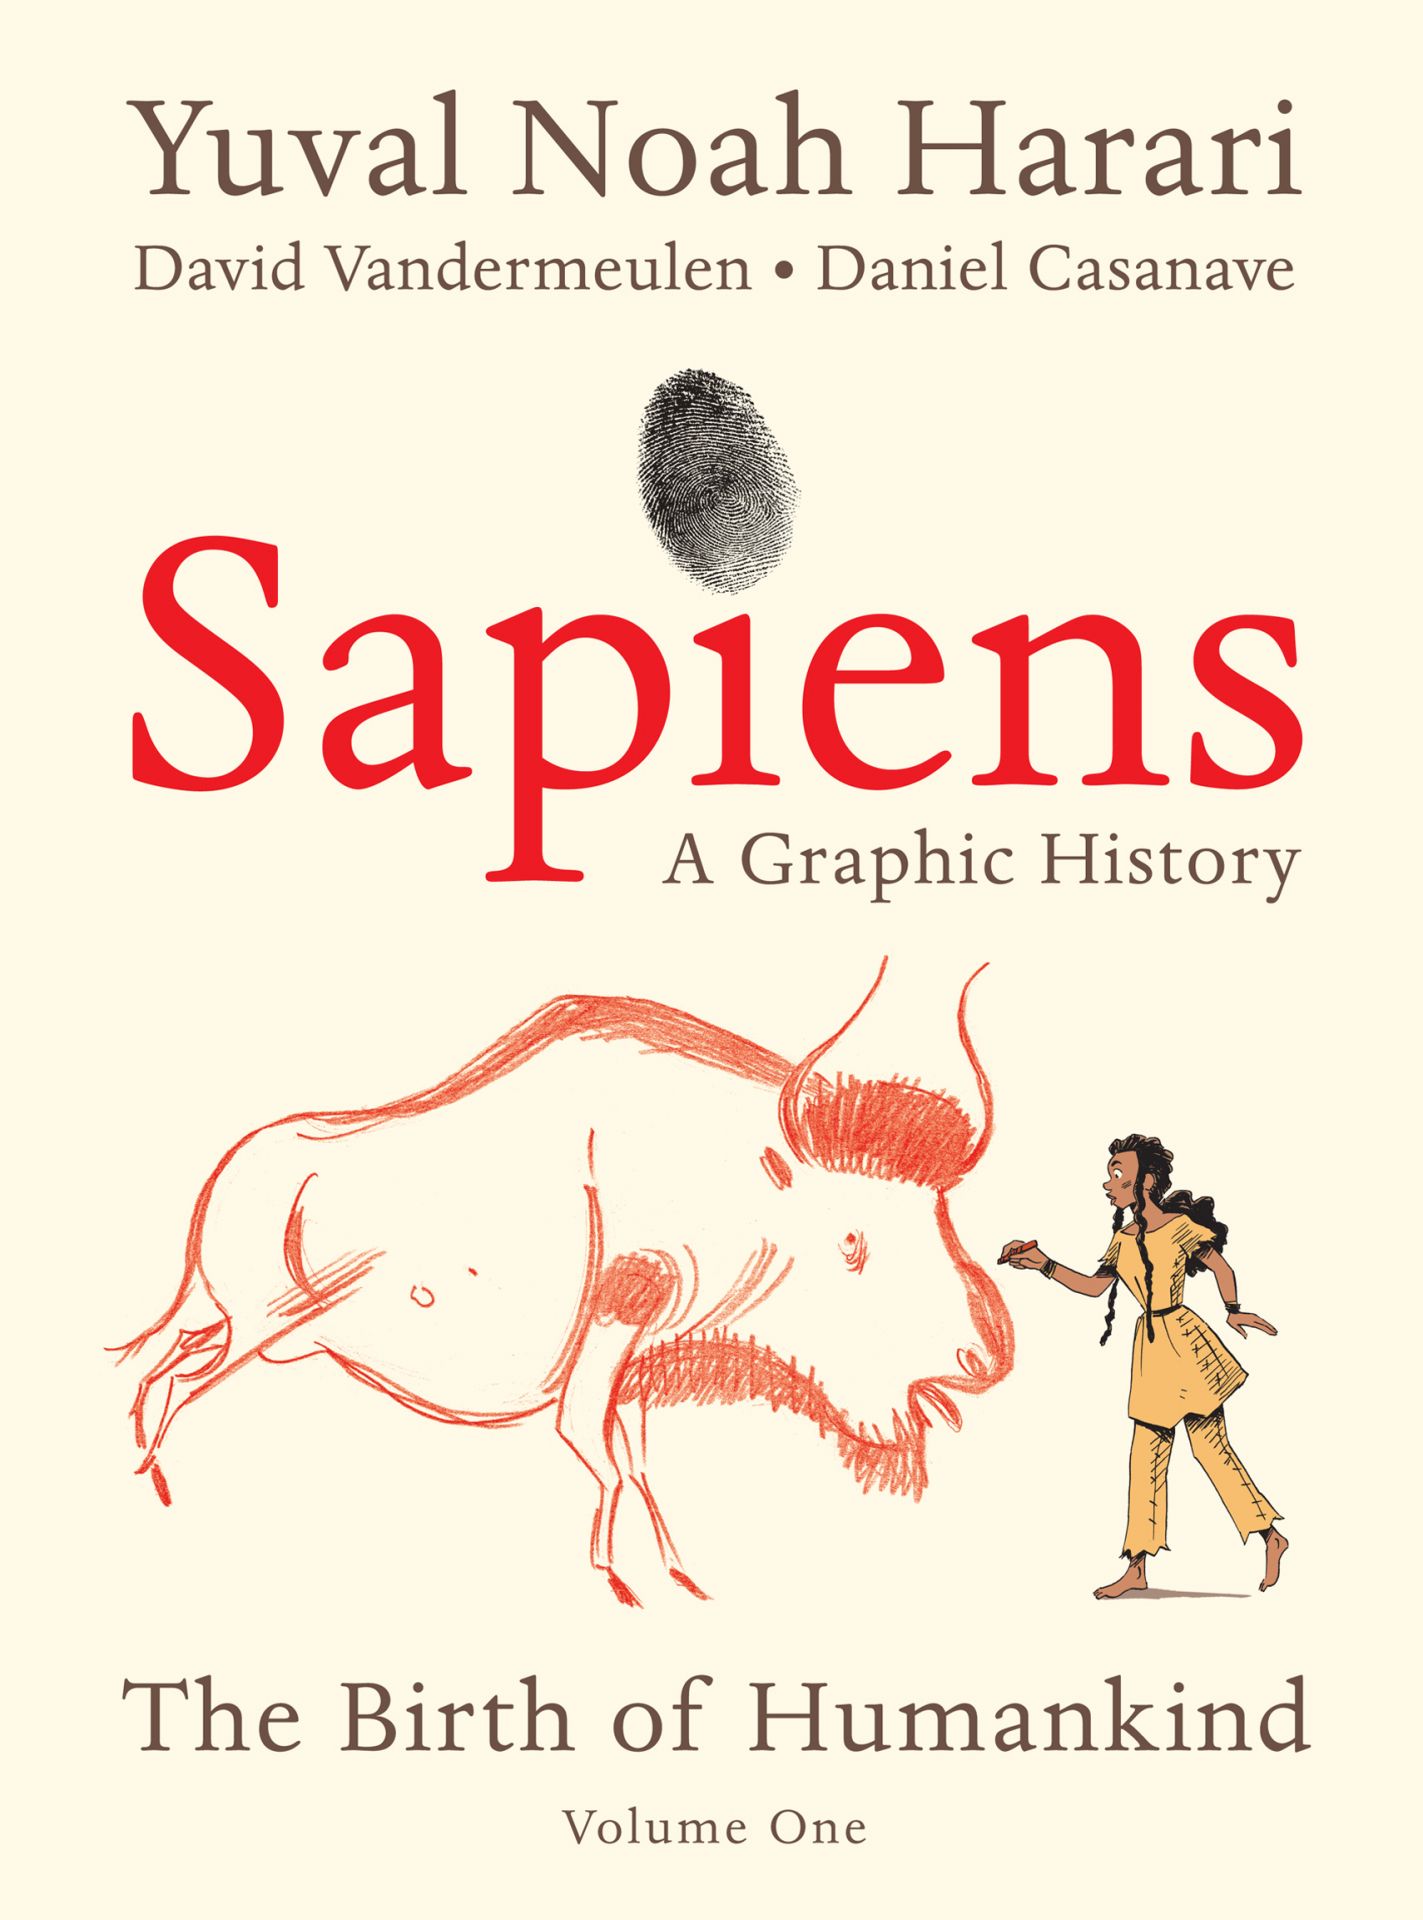 Sapiens: A Graphic History, Volume 1: The Birth of Humankind